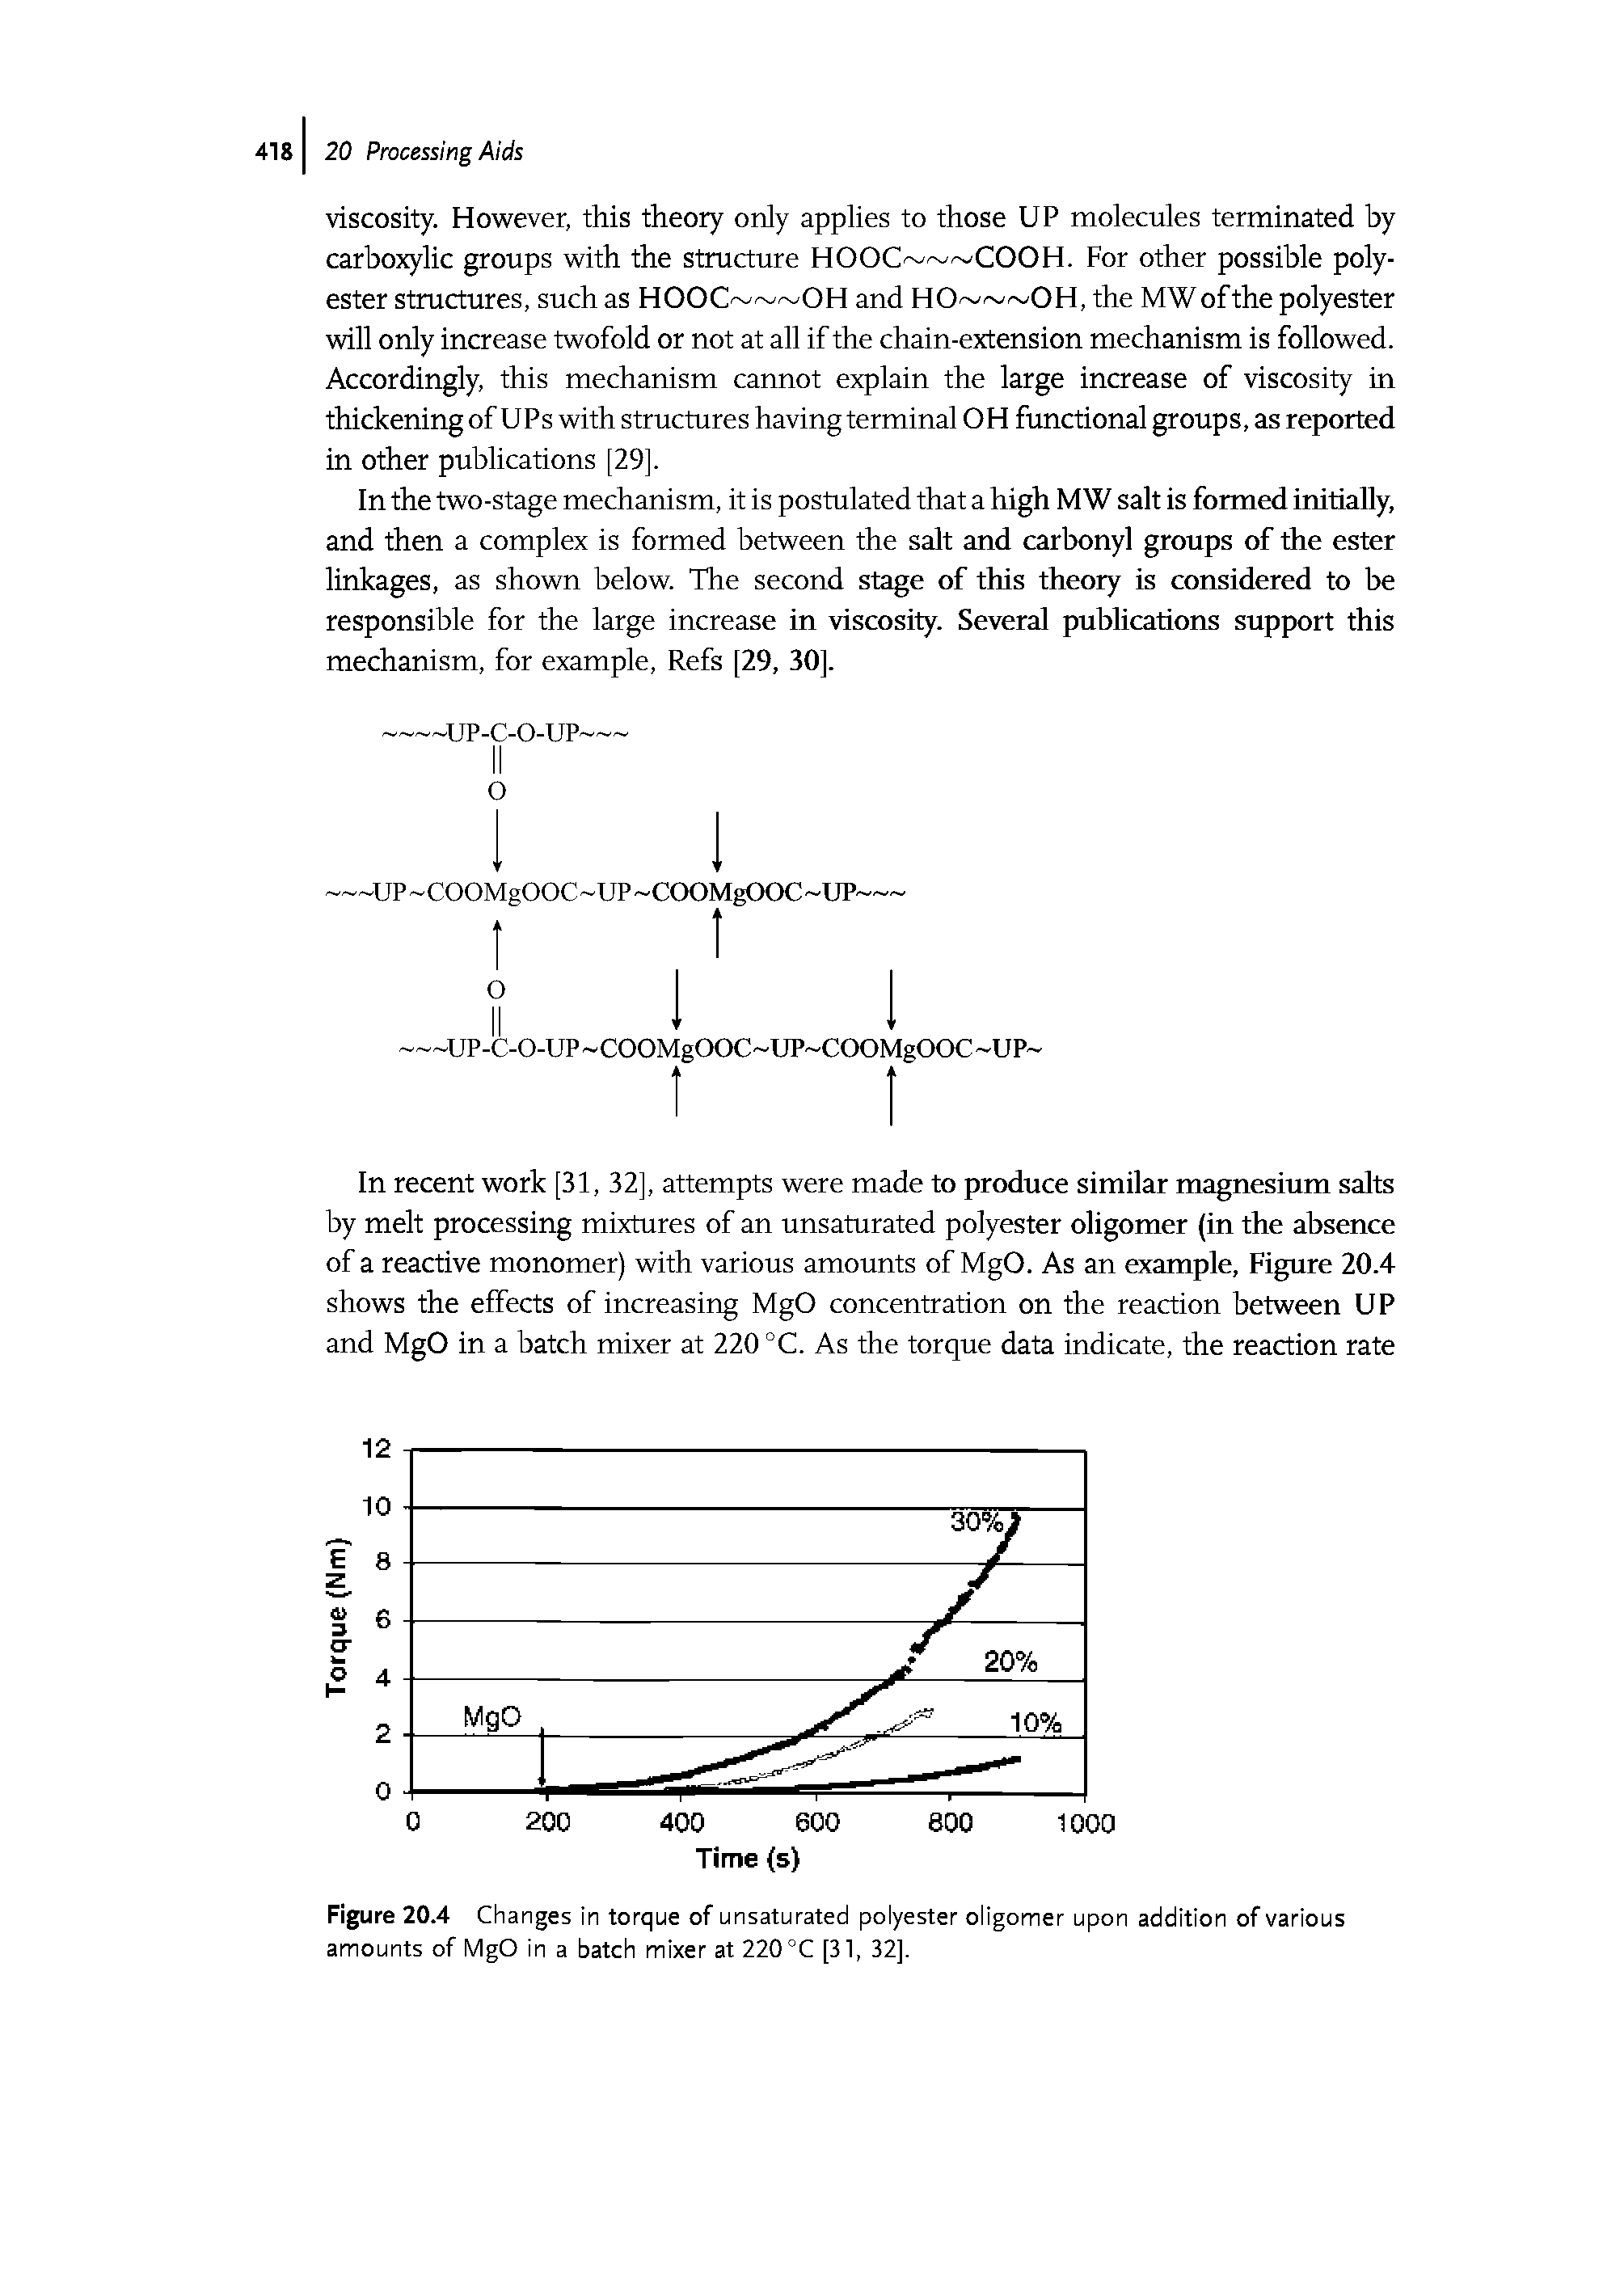 Figure 20.4 Changes in torque of unsaturated polyester oligomer upon addition of various amounts of MgO in a batch mixer at 220 °C [31, 32].